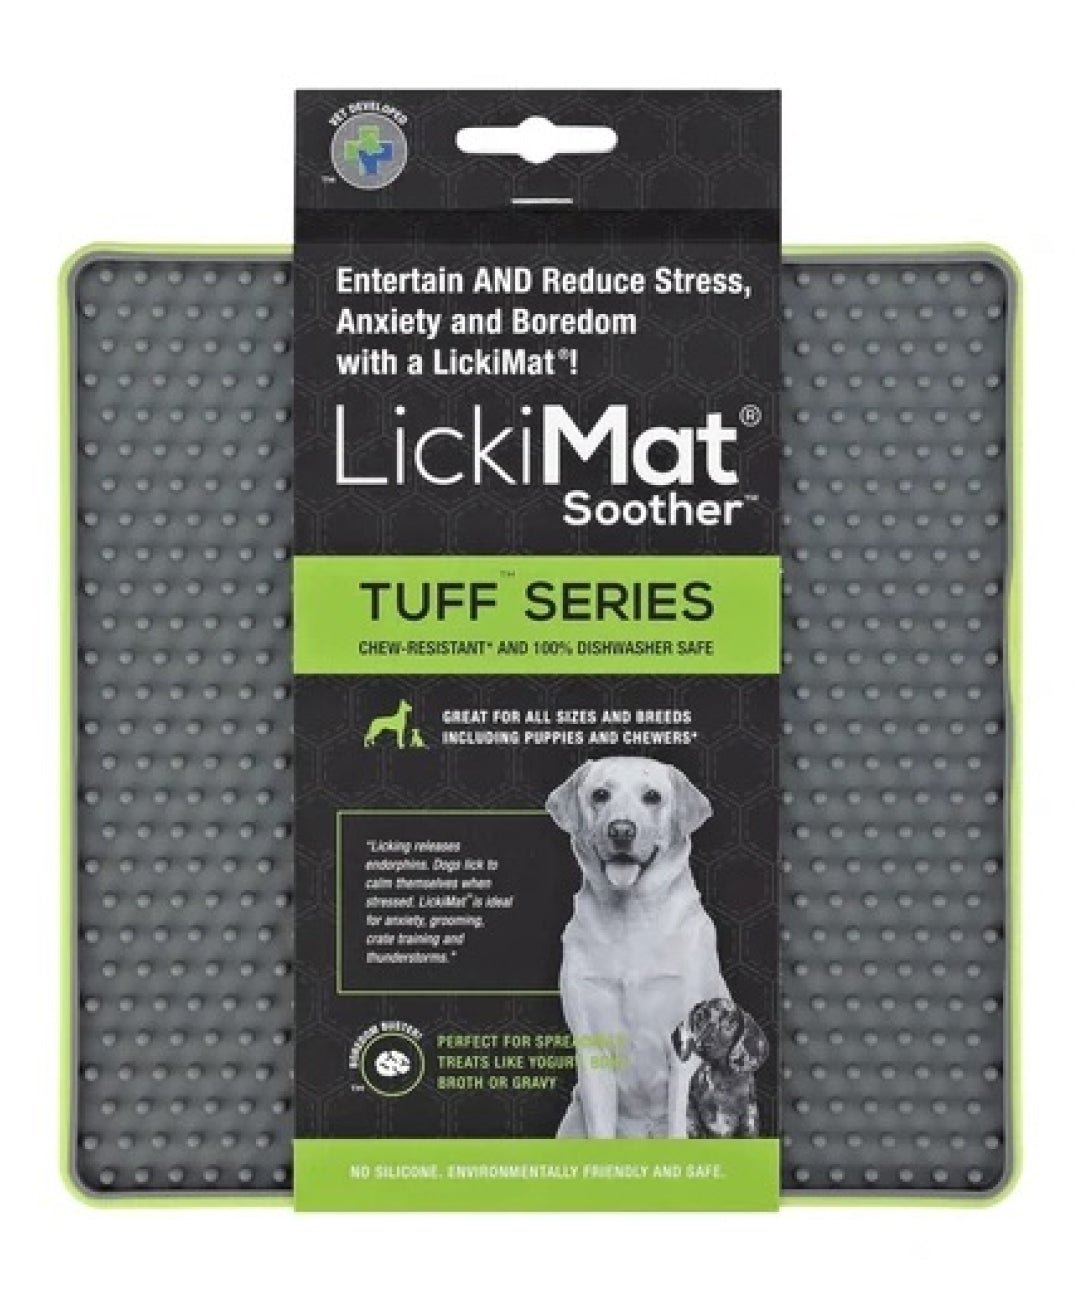 LickiMat Classic Soother Large, Lick Mat for Dogs